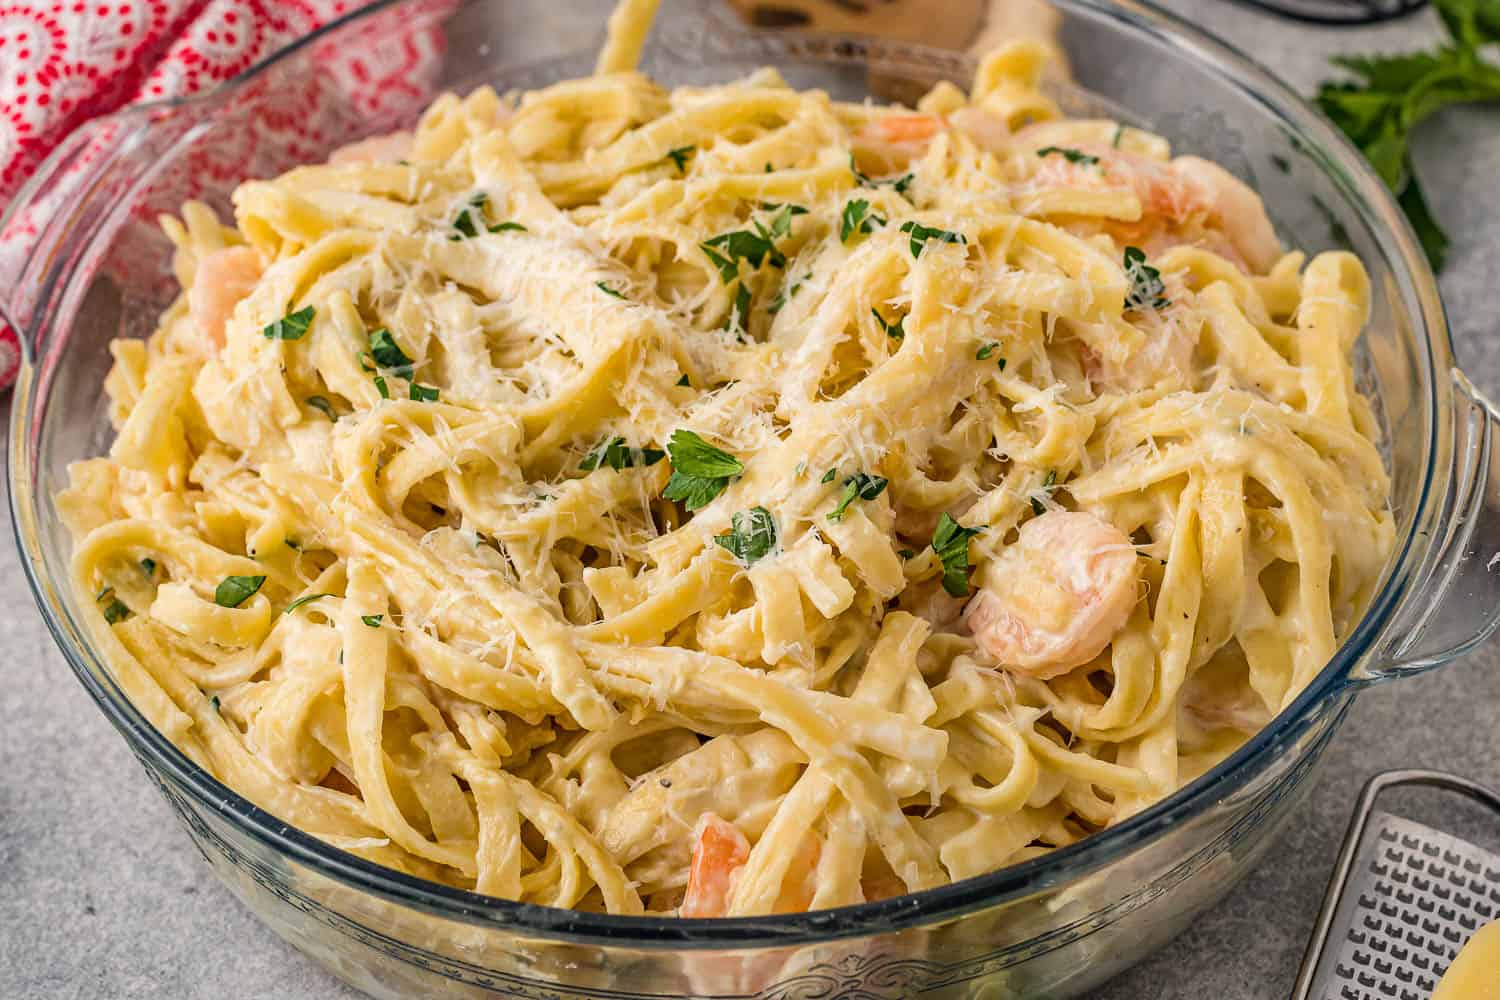 A bowl of pasta with shrimp and parmesan cheese.